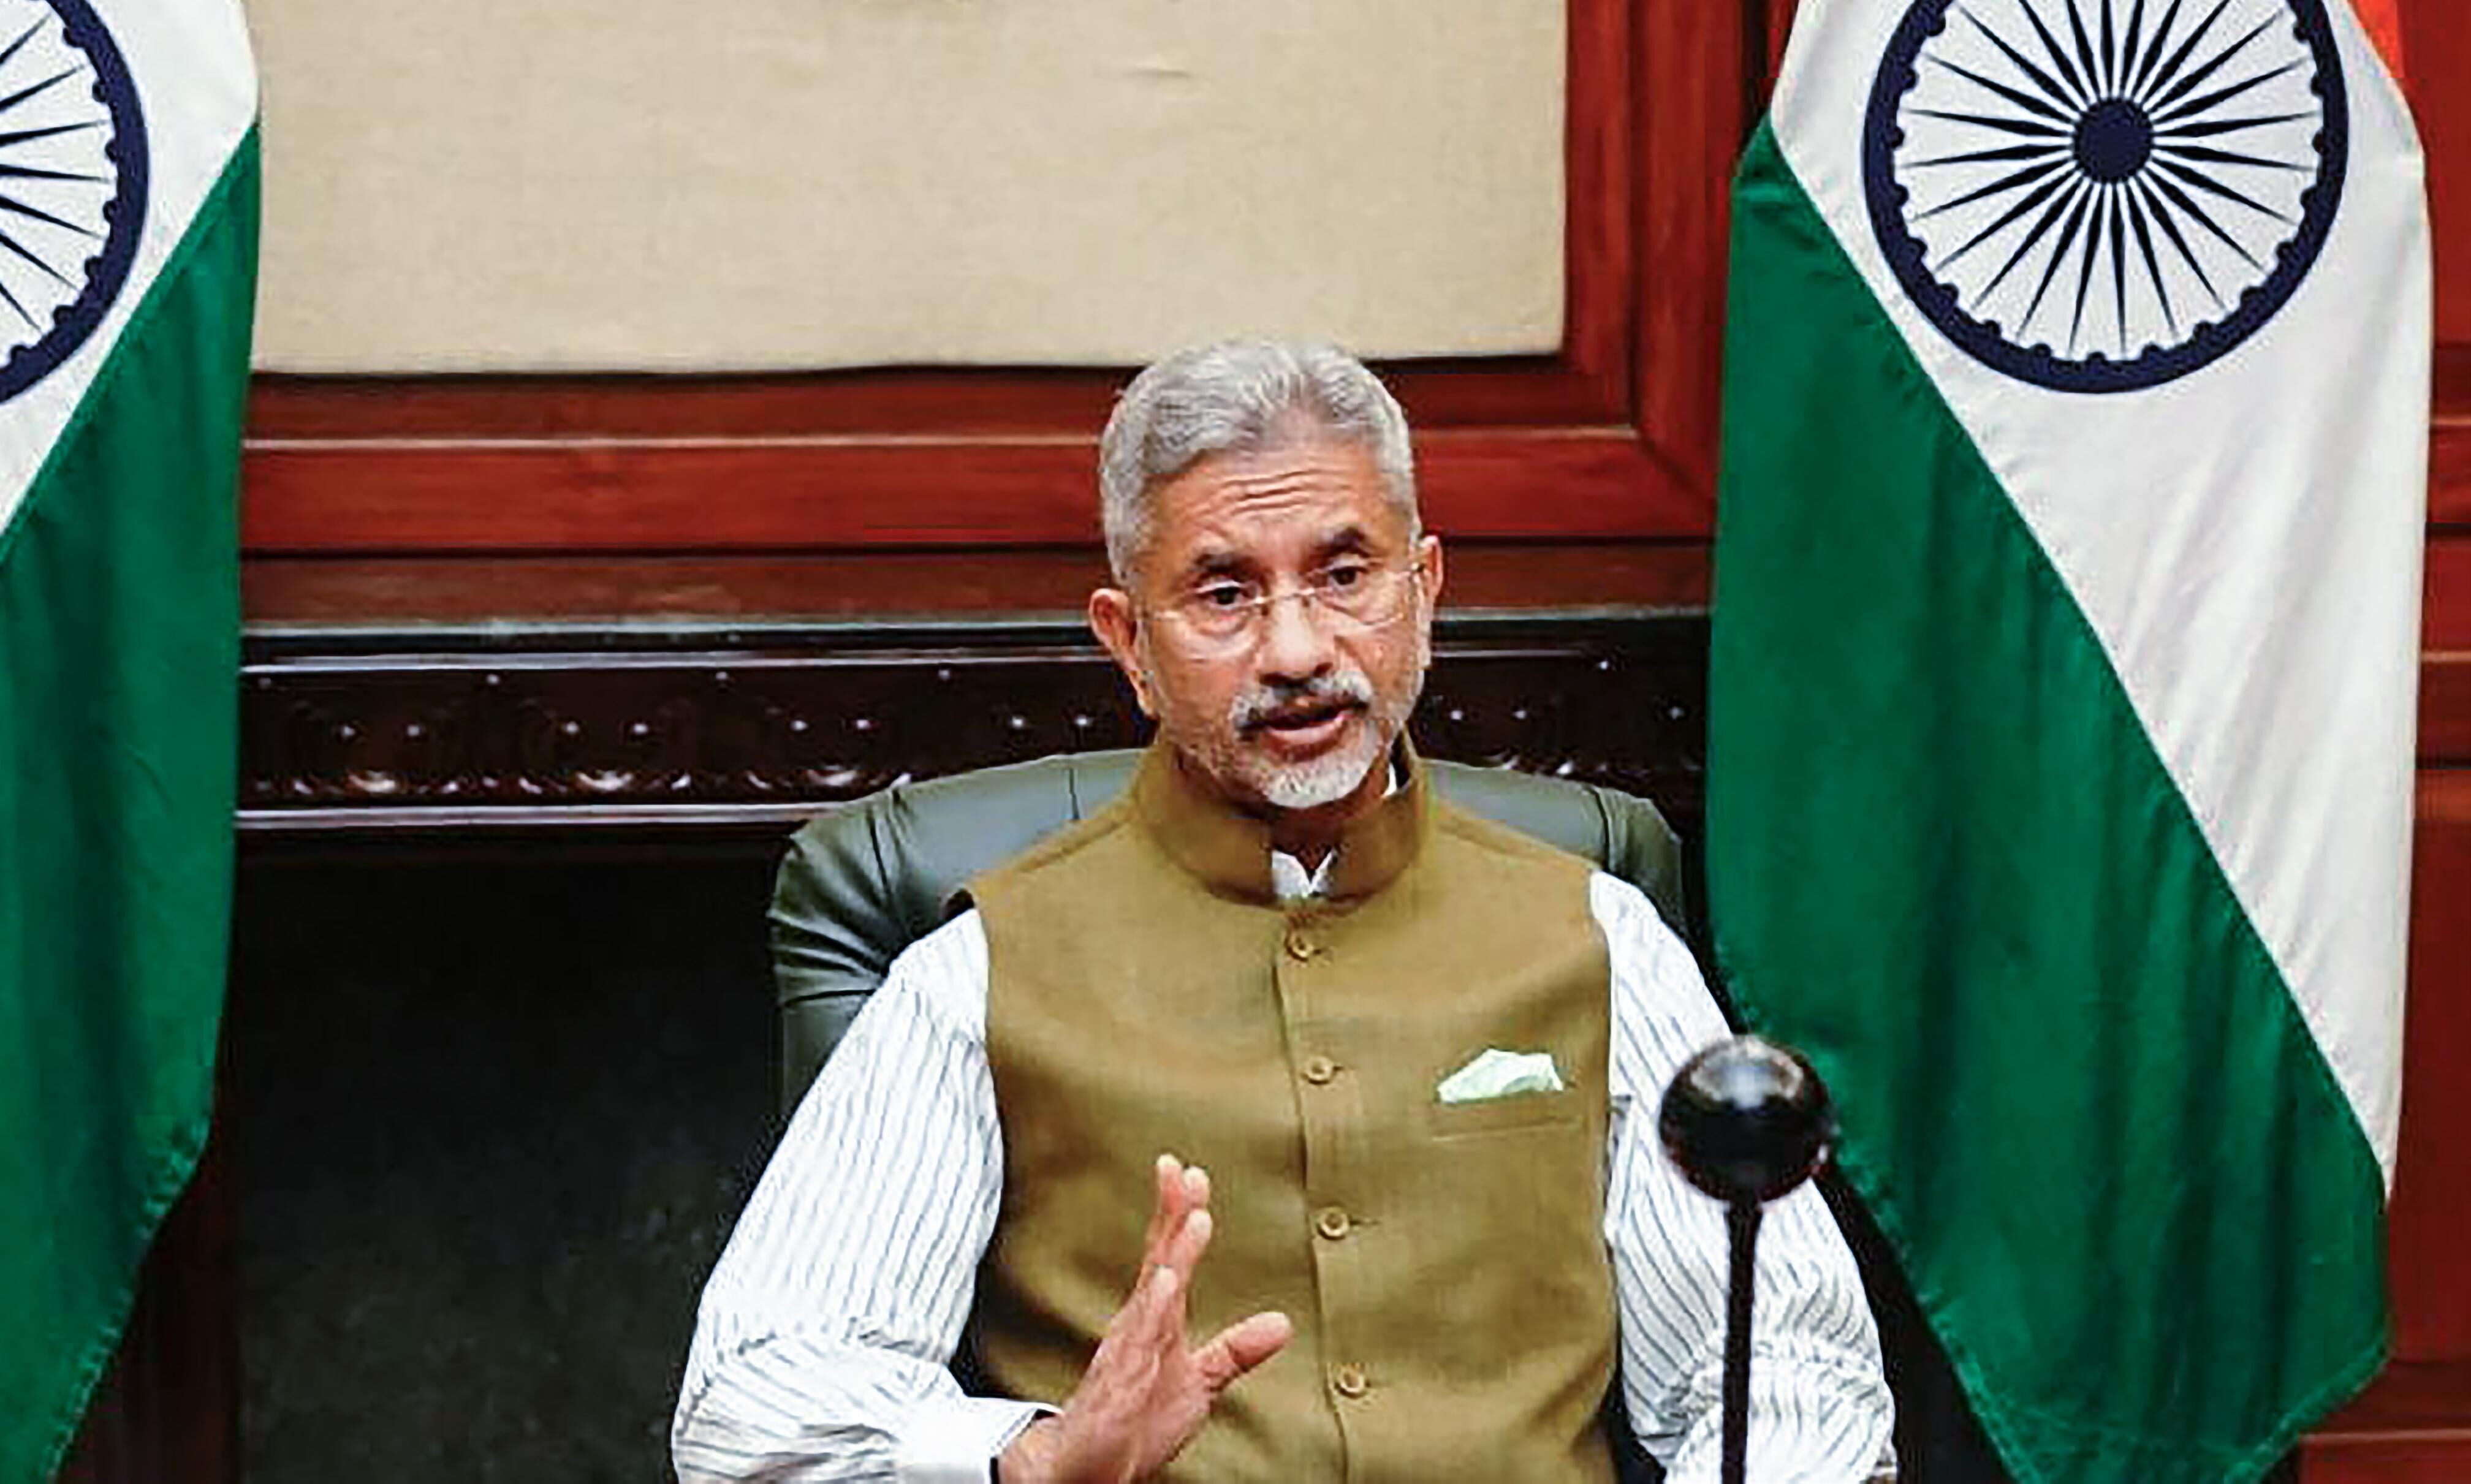 BRICS must live up to commitments to sovereign equality and territorial integrity: Jaishankar